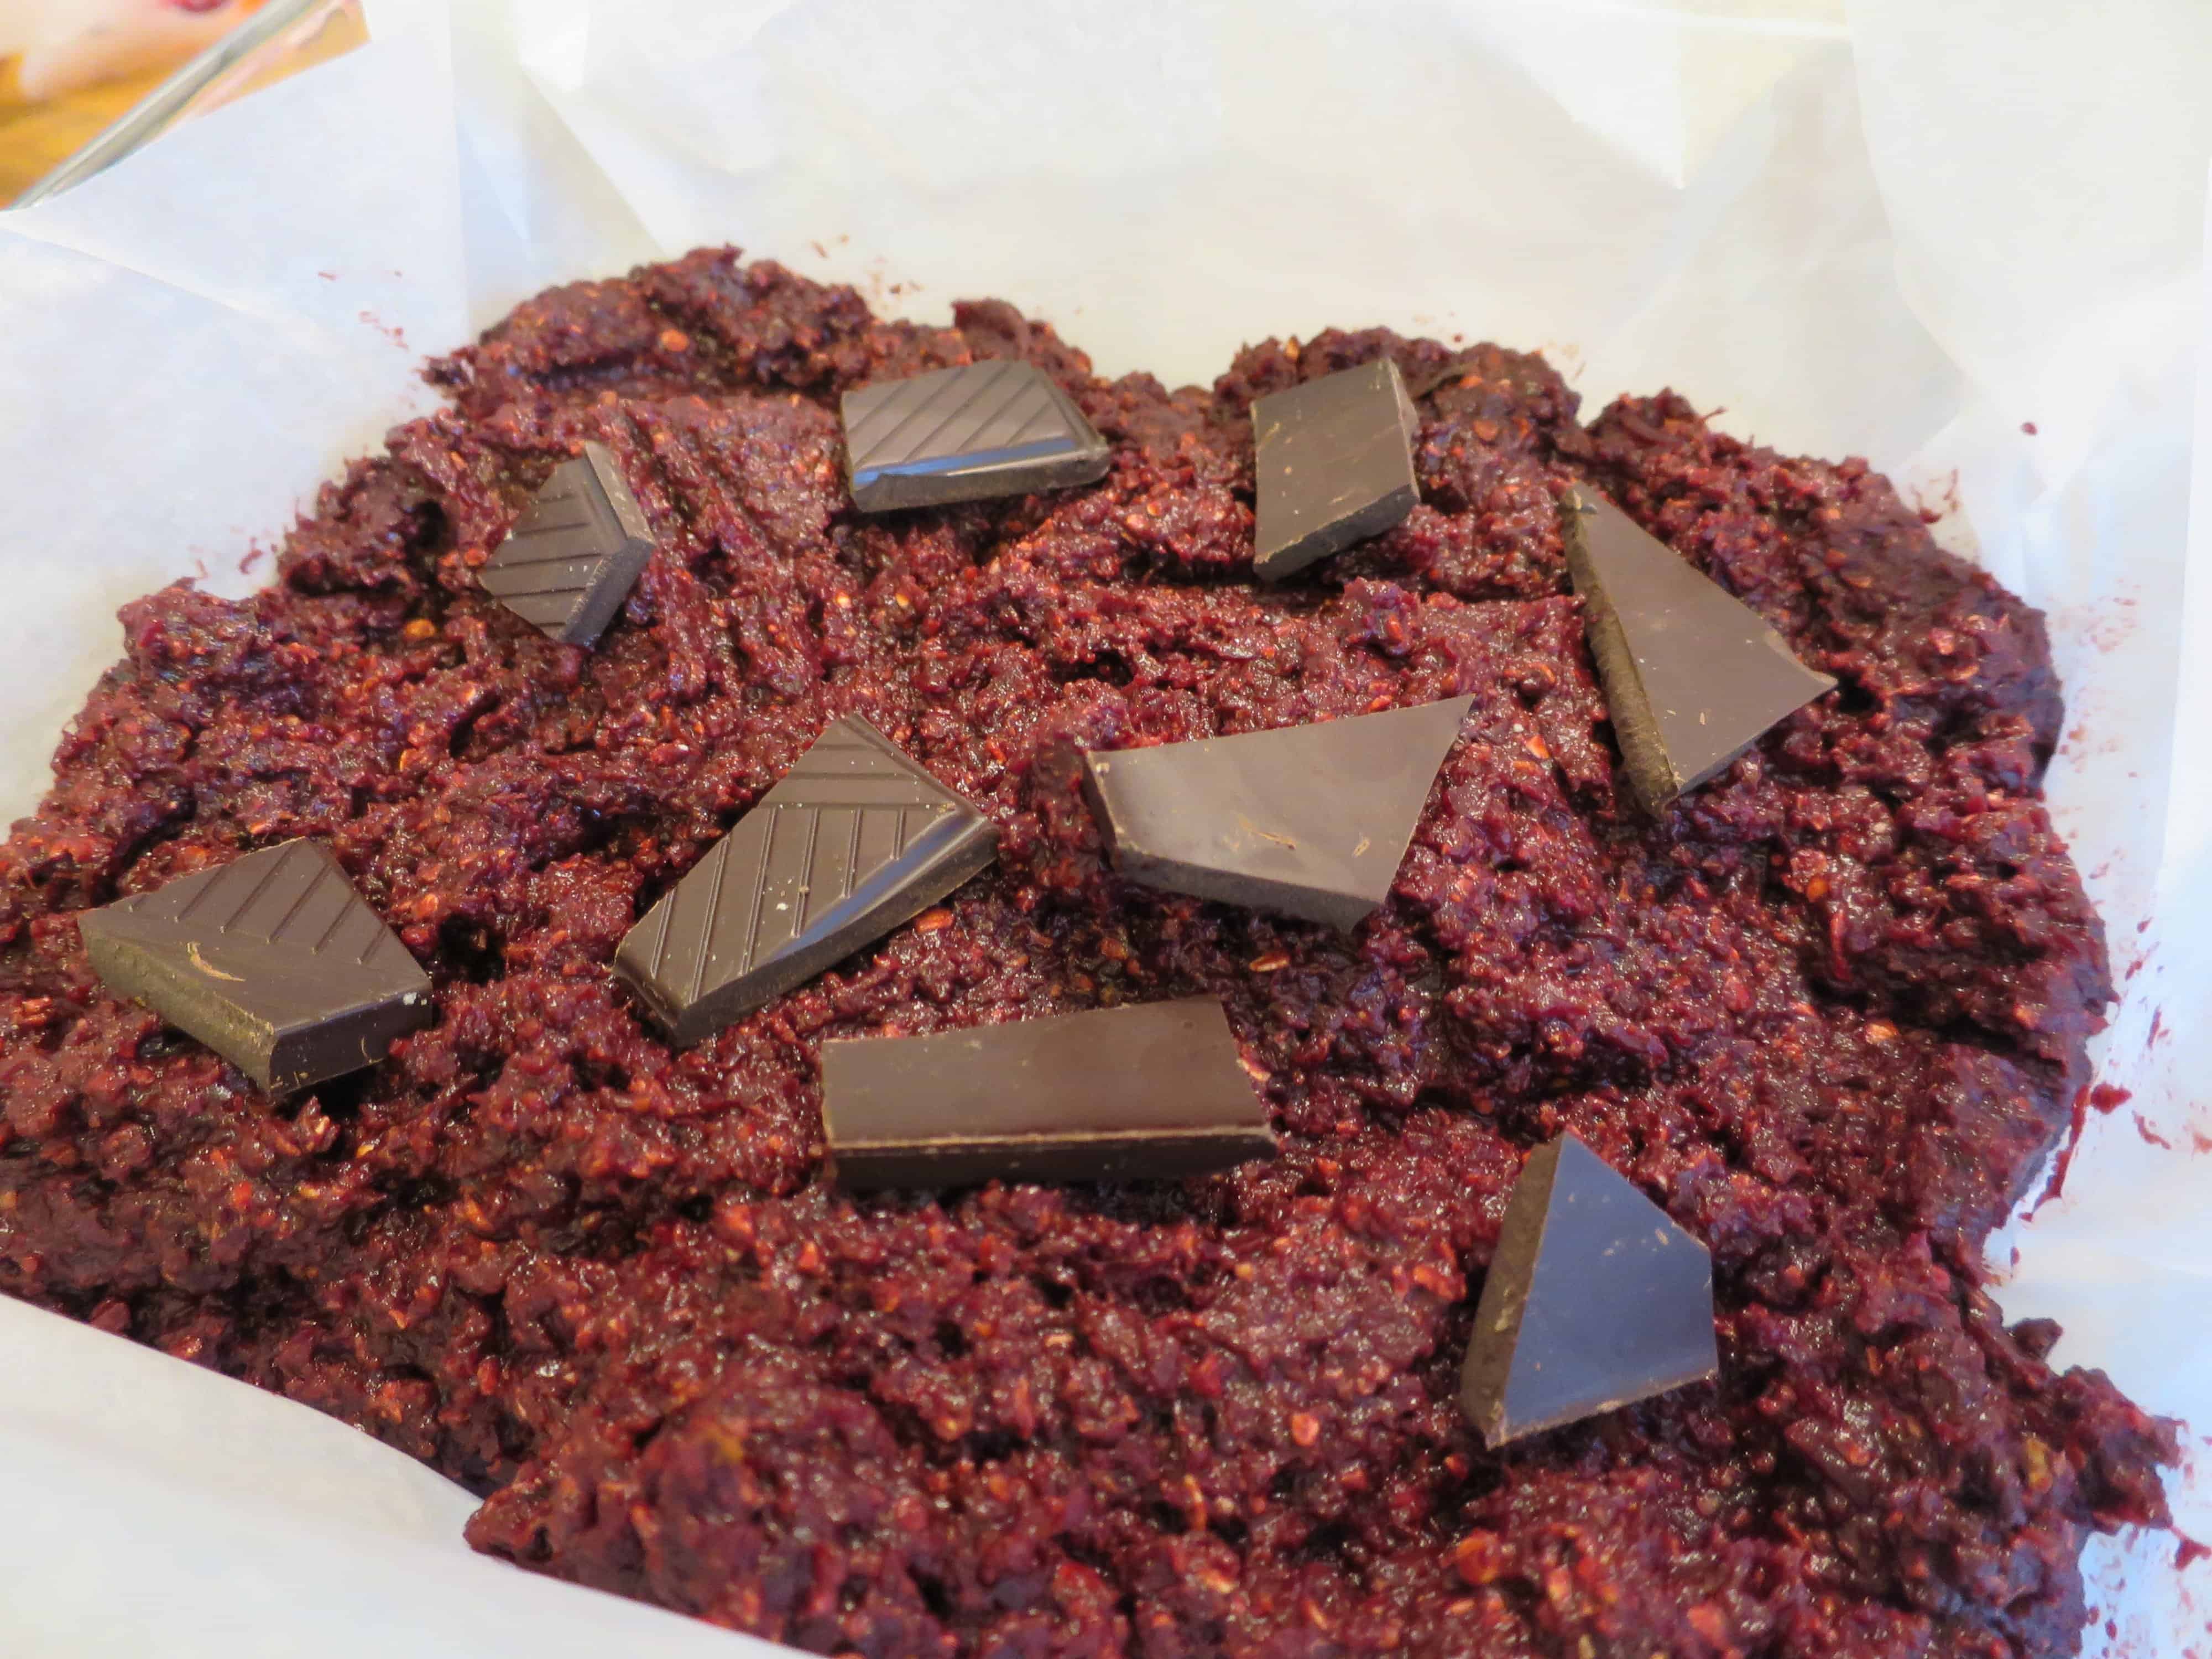 Gorgeous, purple yumminess ready to go in the oven! Picture by Lauren at https://laurenwelland.wordpress.com/